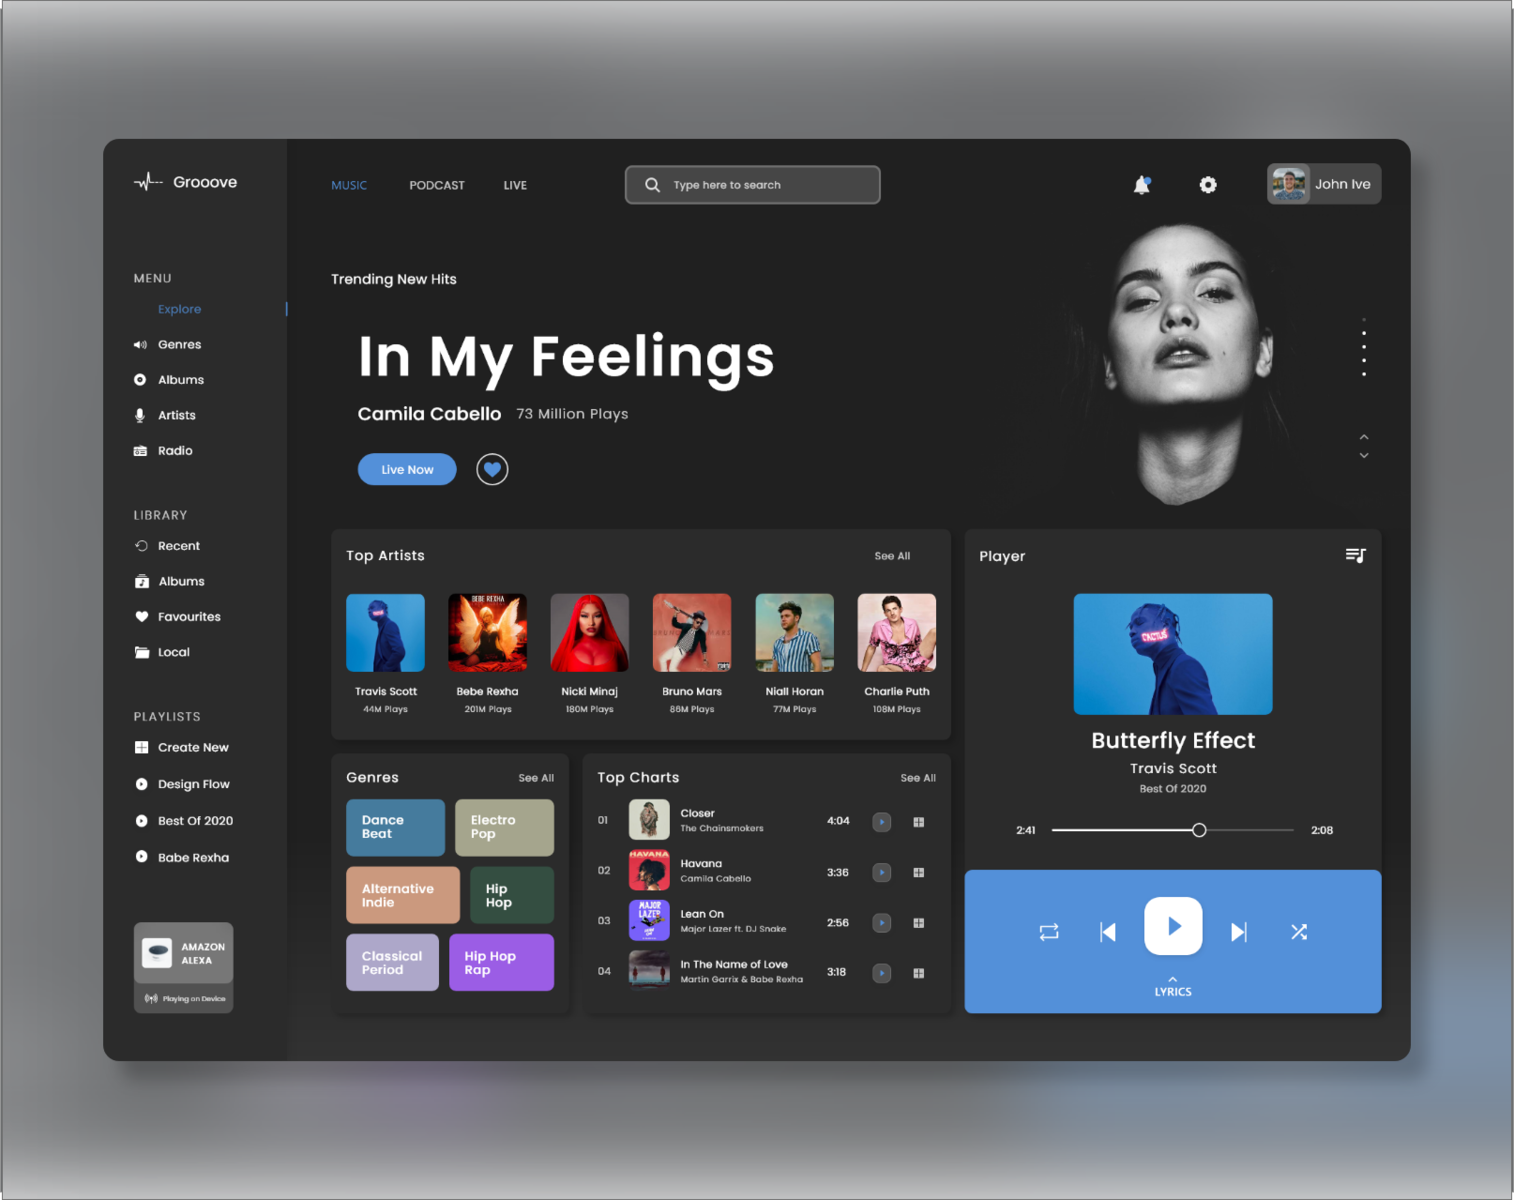 Music Dashboard by Shubham Patil on Dribbble